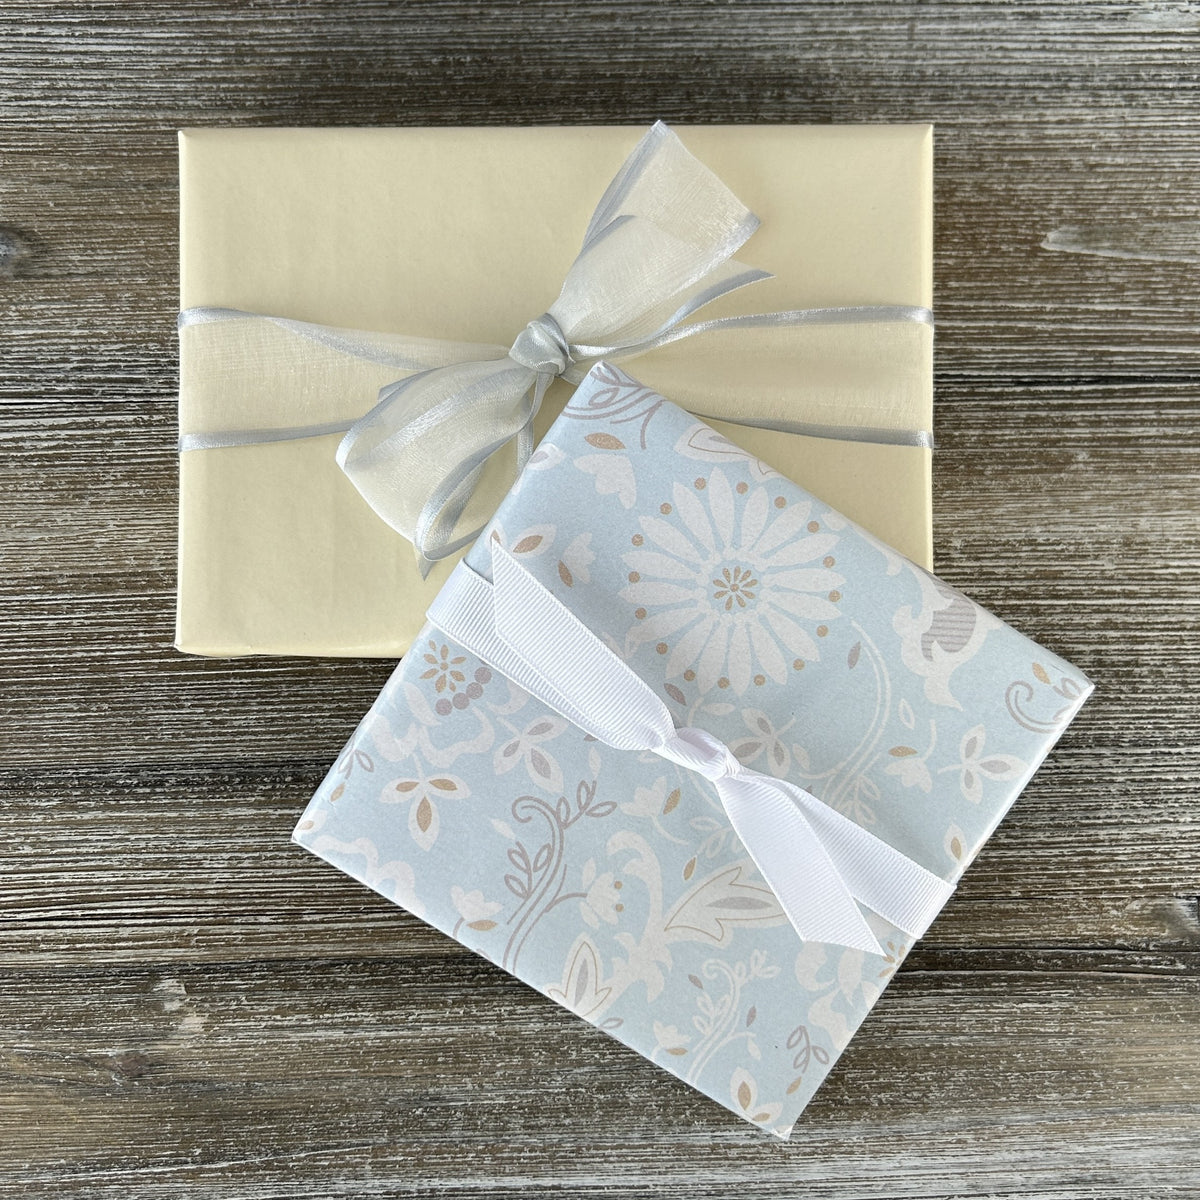 Products wrapped in gift wrap with a fabric bow.